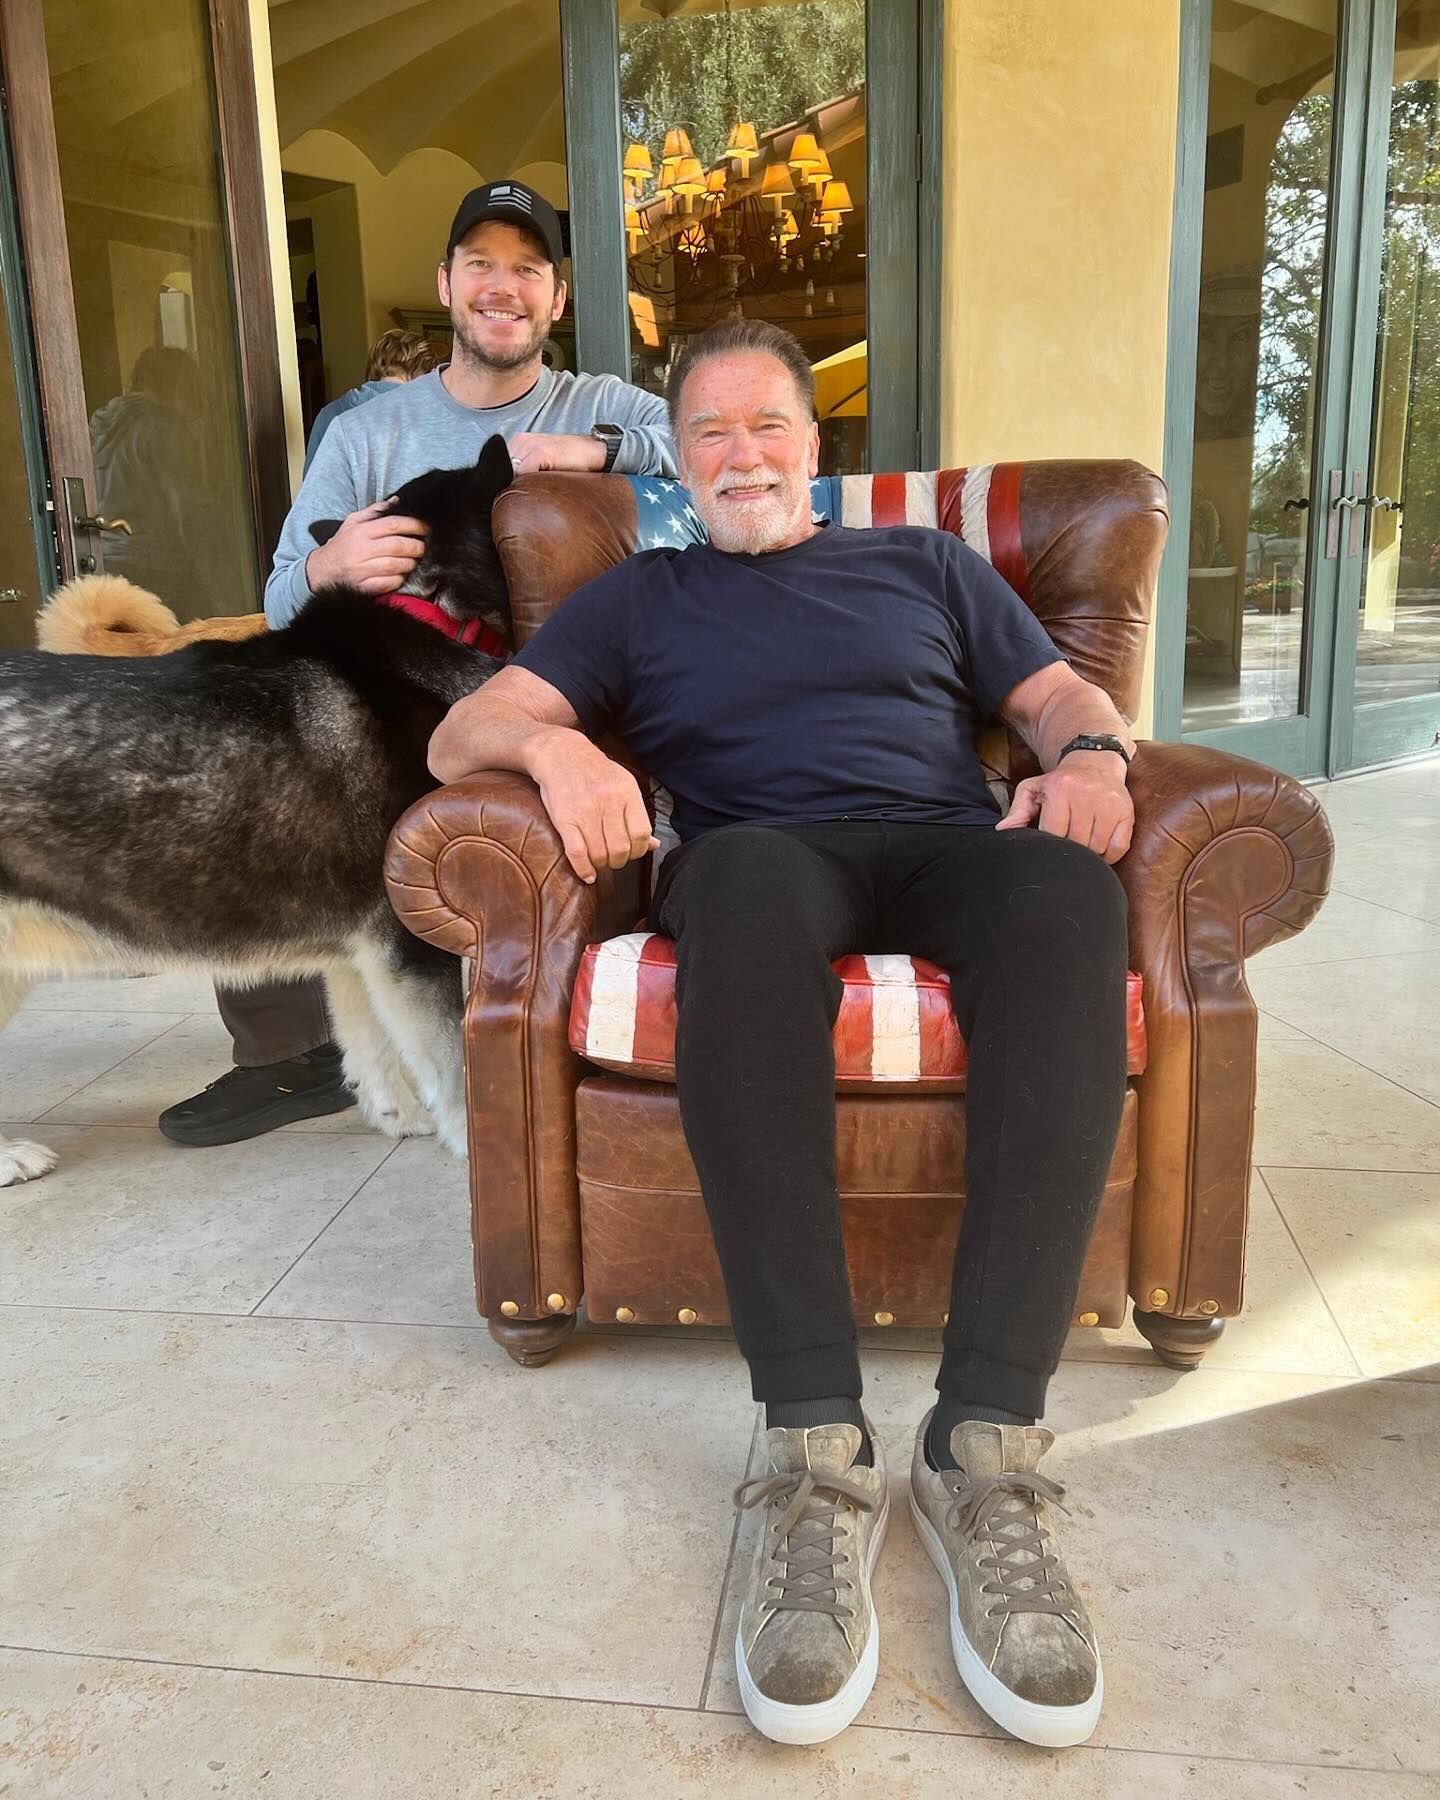 Chris Pratt poses next to his father-in-law Arnold Schwarzenegger in a birthday post to celebrate the Terminator star's 77th birthday